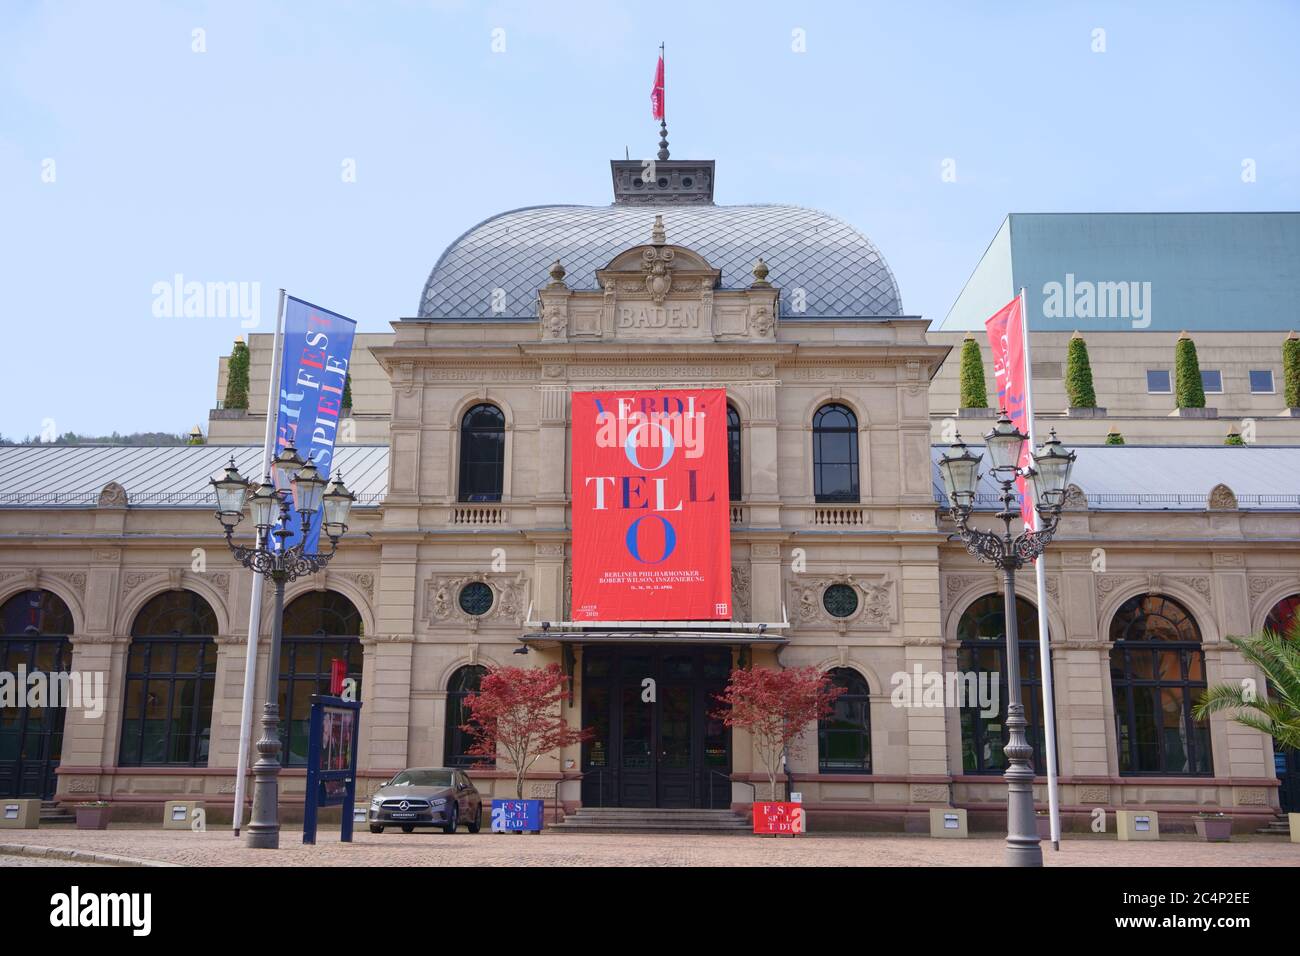 Festspielhaus Baden-Baden, Germany's largest opera and concert house. The Festival Hall is a large classical music venue in Europe. Stock Photo